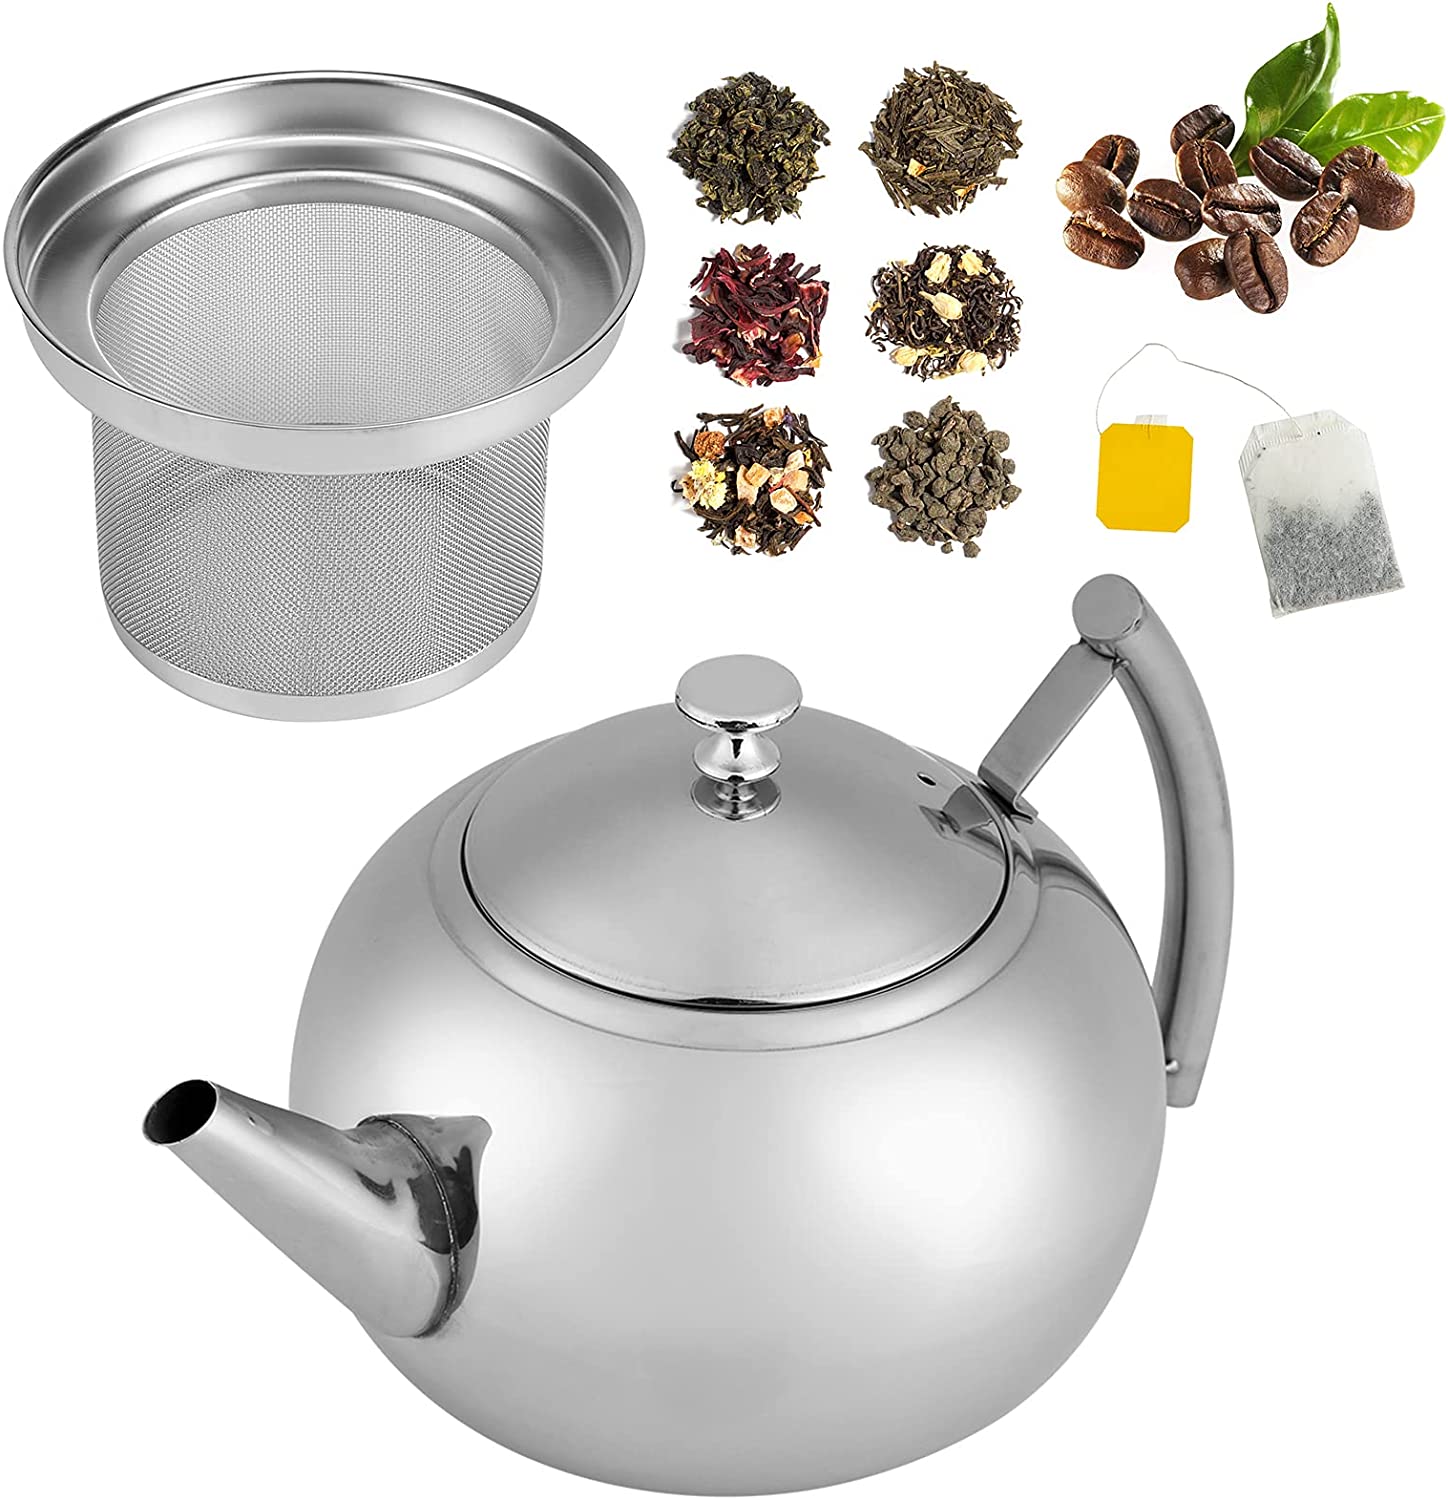 iFCOW 2L Stainless Steel Teapot with Removable Infuser